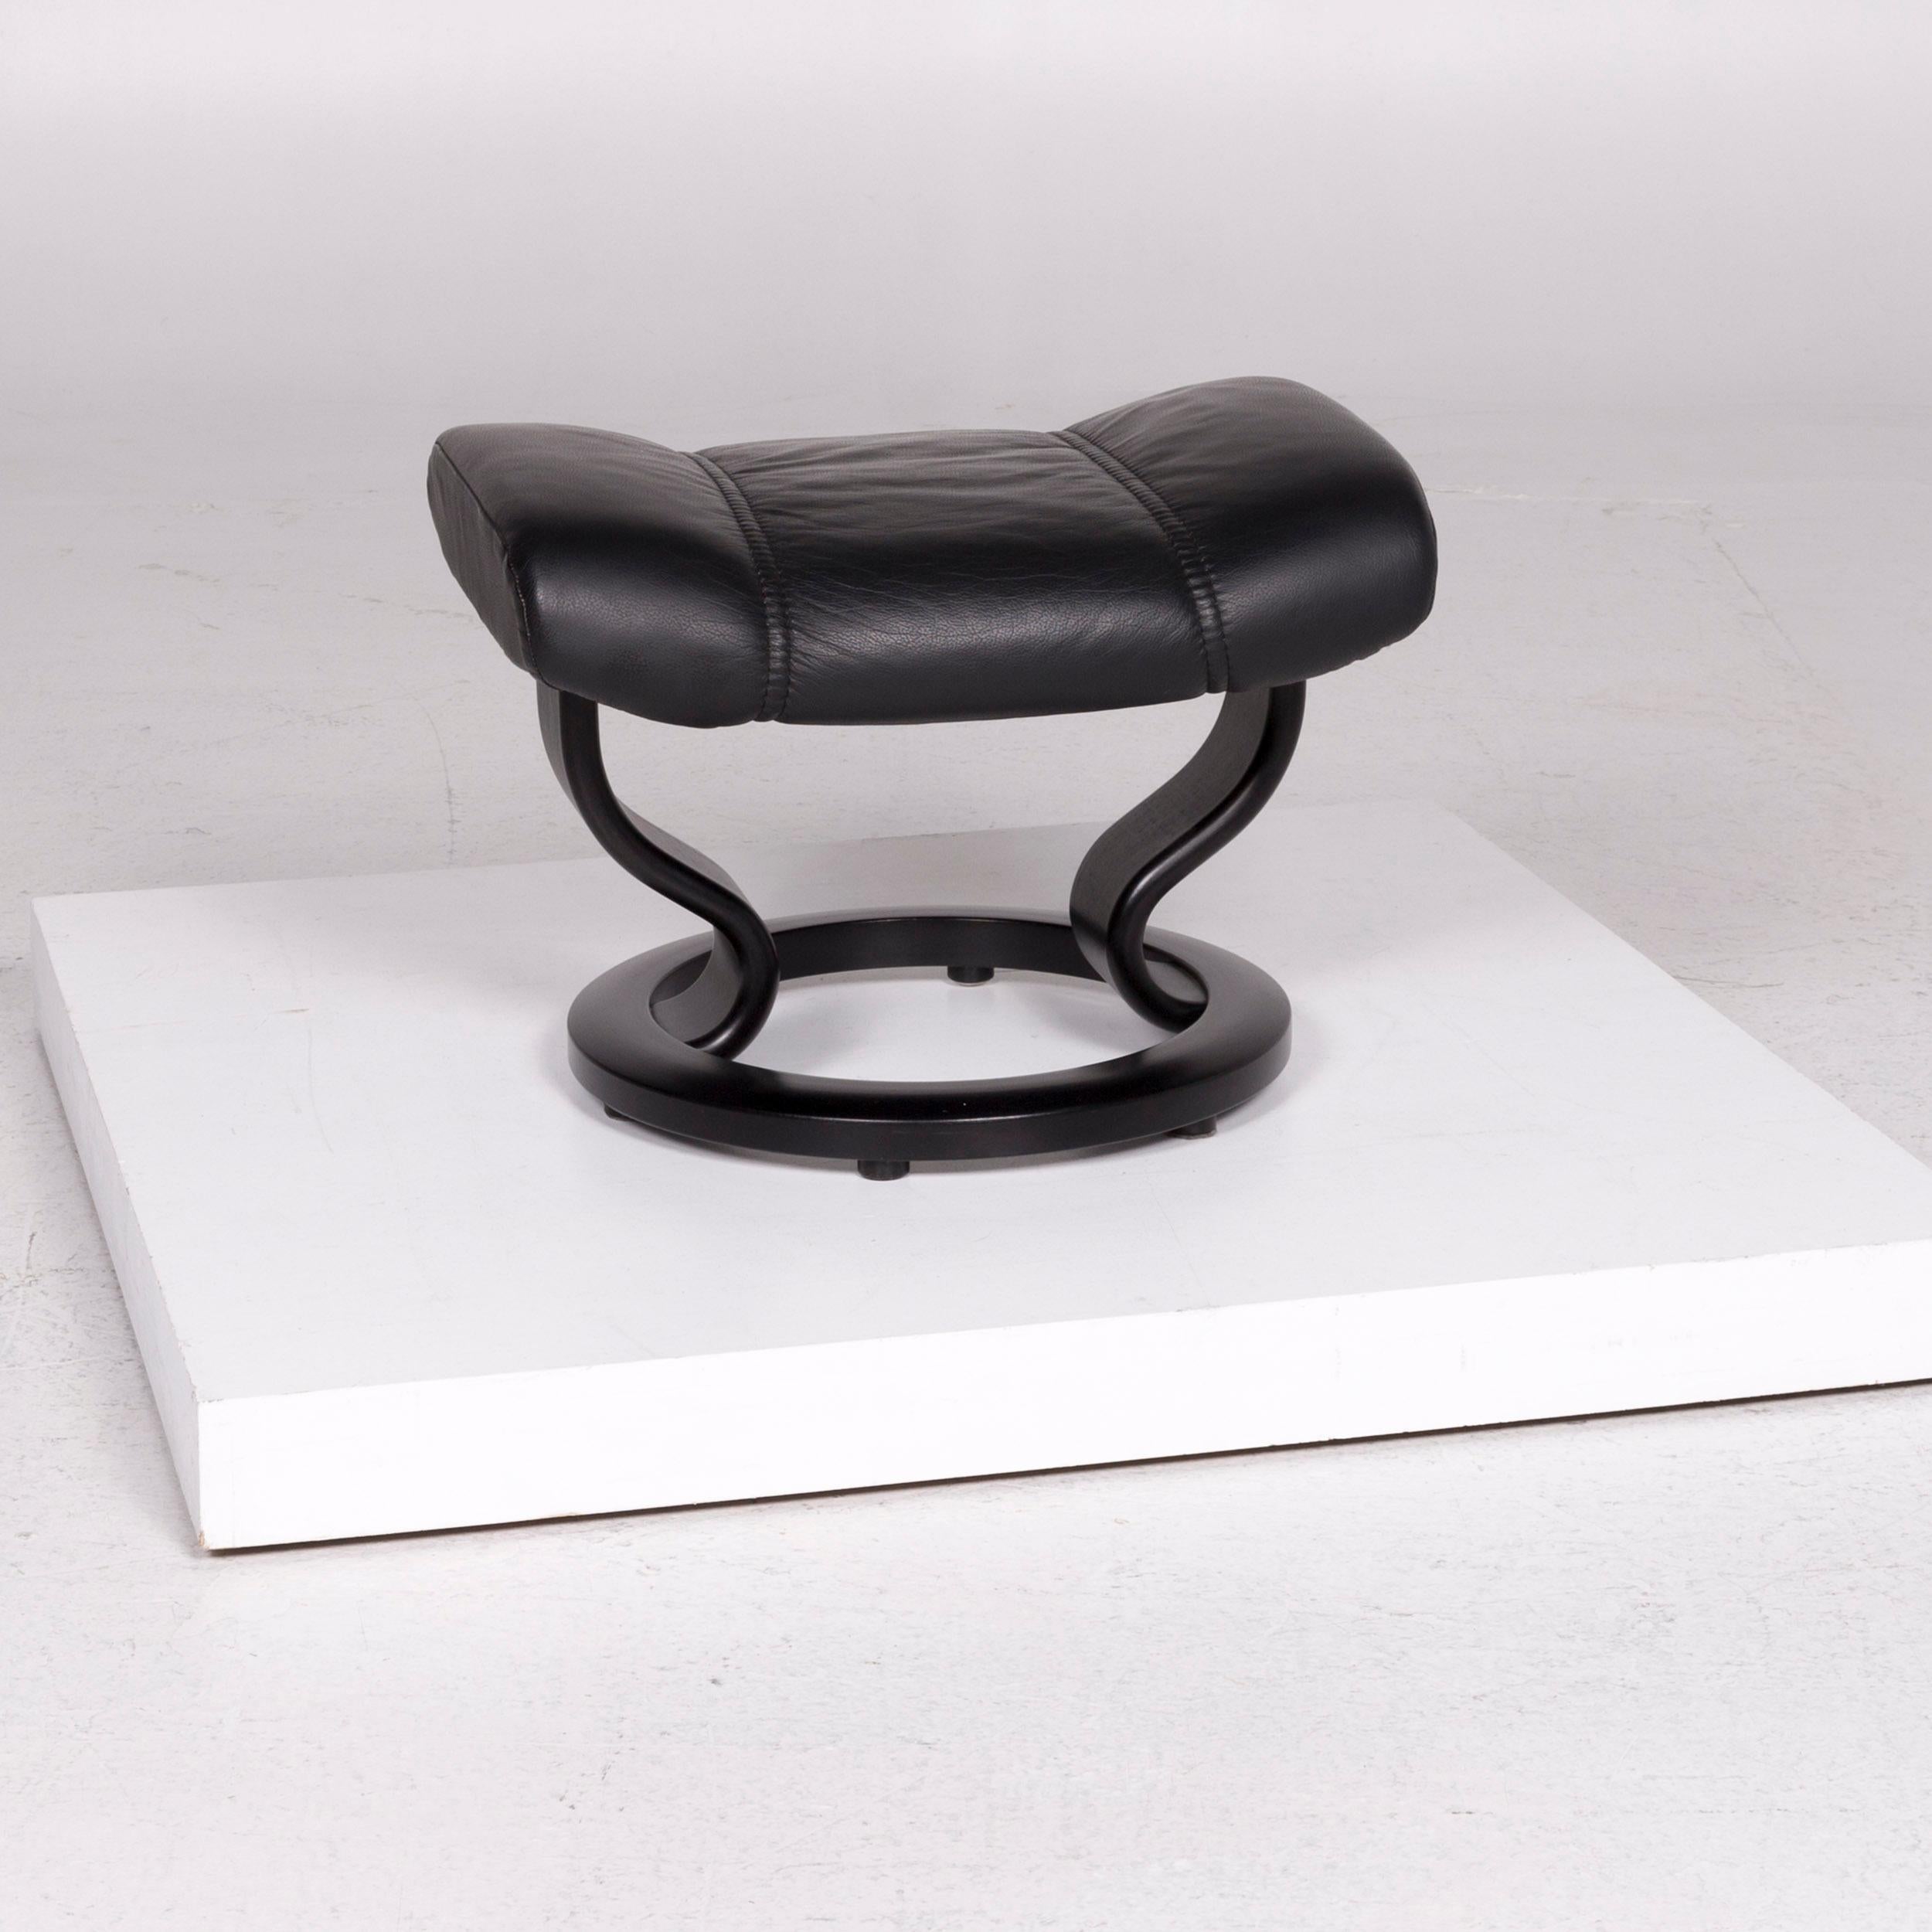 Stressless Consul Leather Armchair Black Includes Stool 8